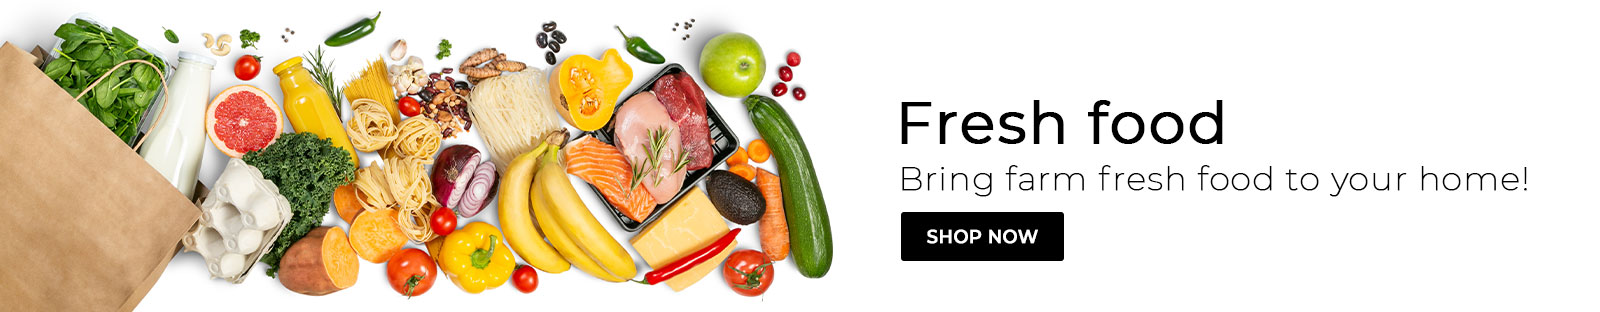 default pcp FreshFood page Banner Component